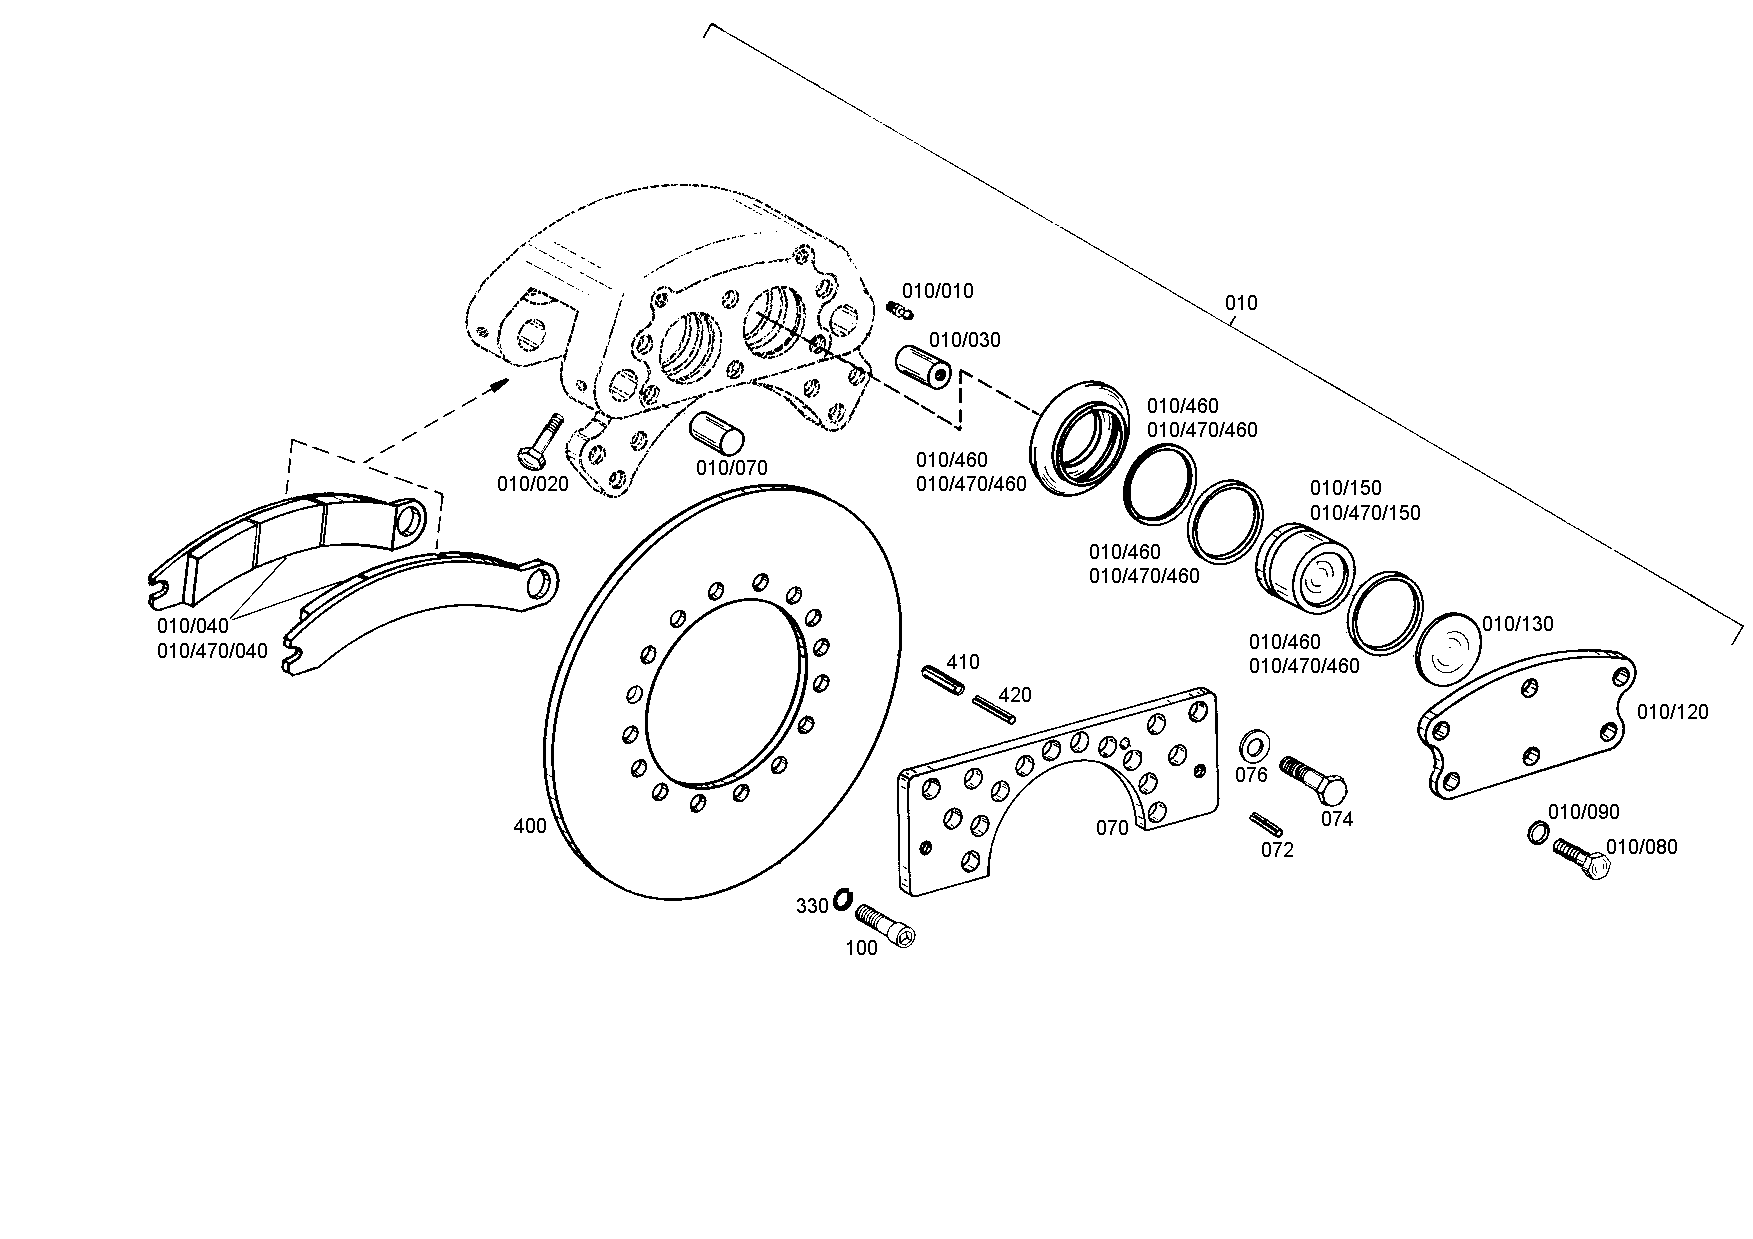 drawing for HITACHI 530609208 - WASHER (figure 5)